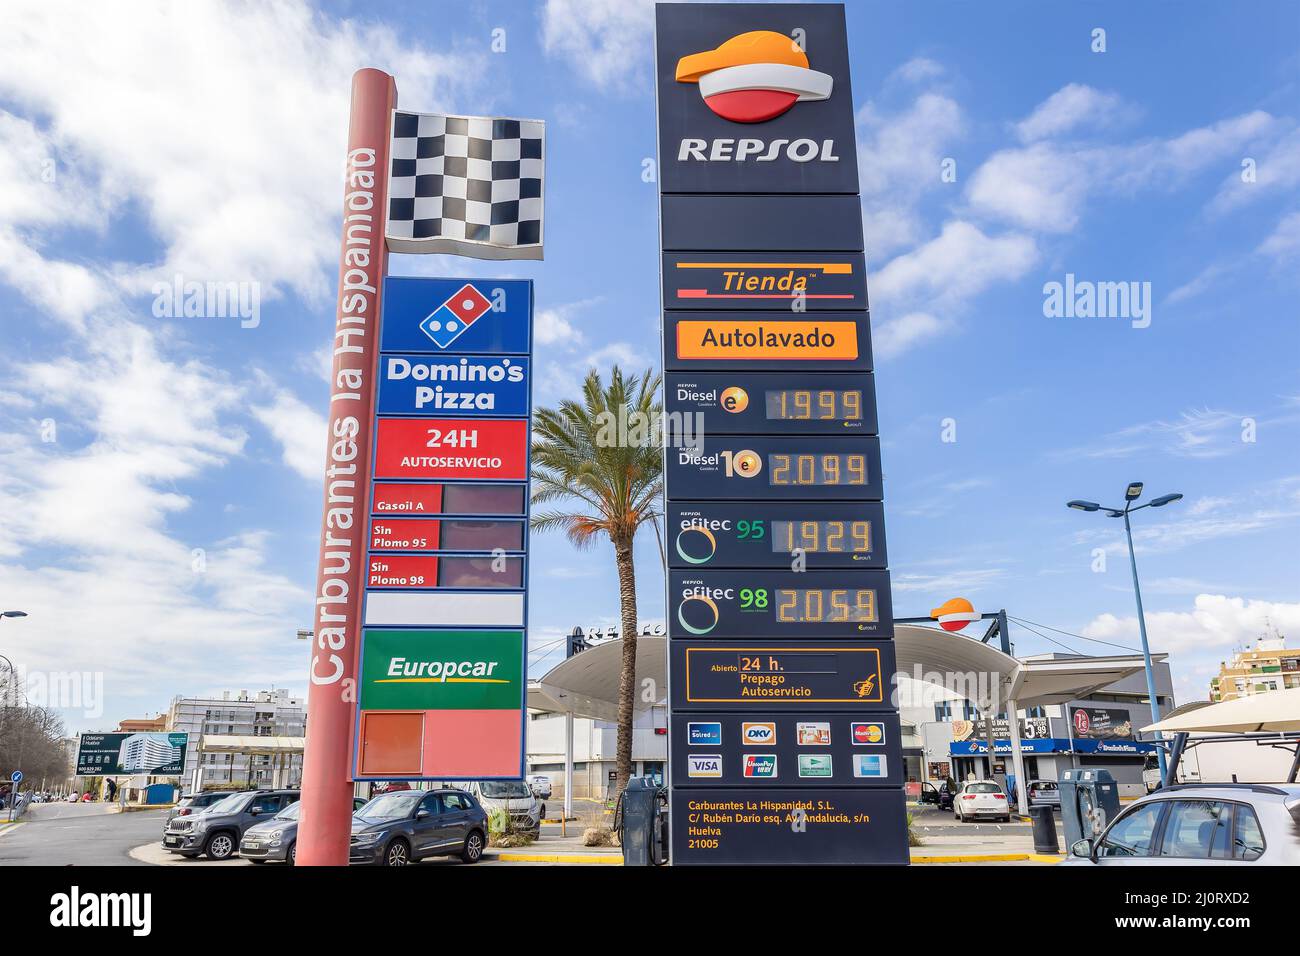 Huelva, Spain - March 6, 2022: DIsplay with gas prices, diesel and unleaded gasoline, at Repsol gas station. Stock Photo